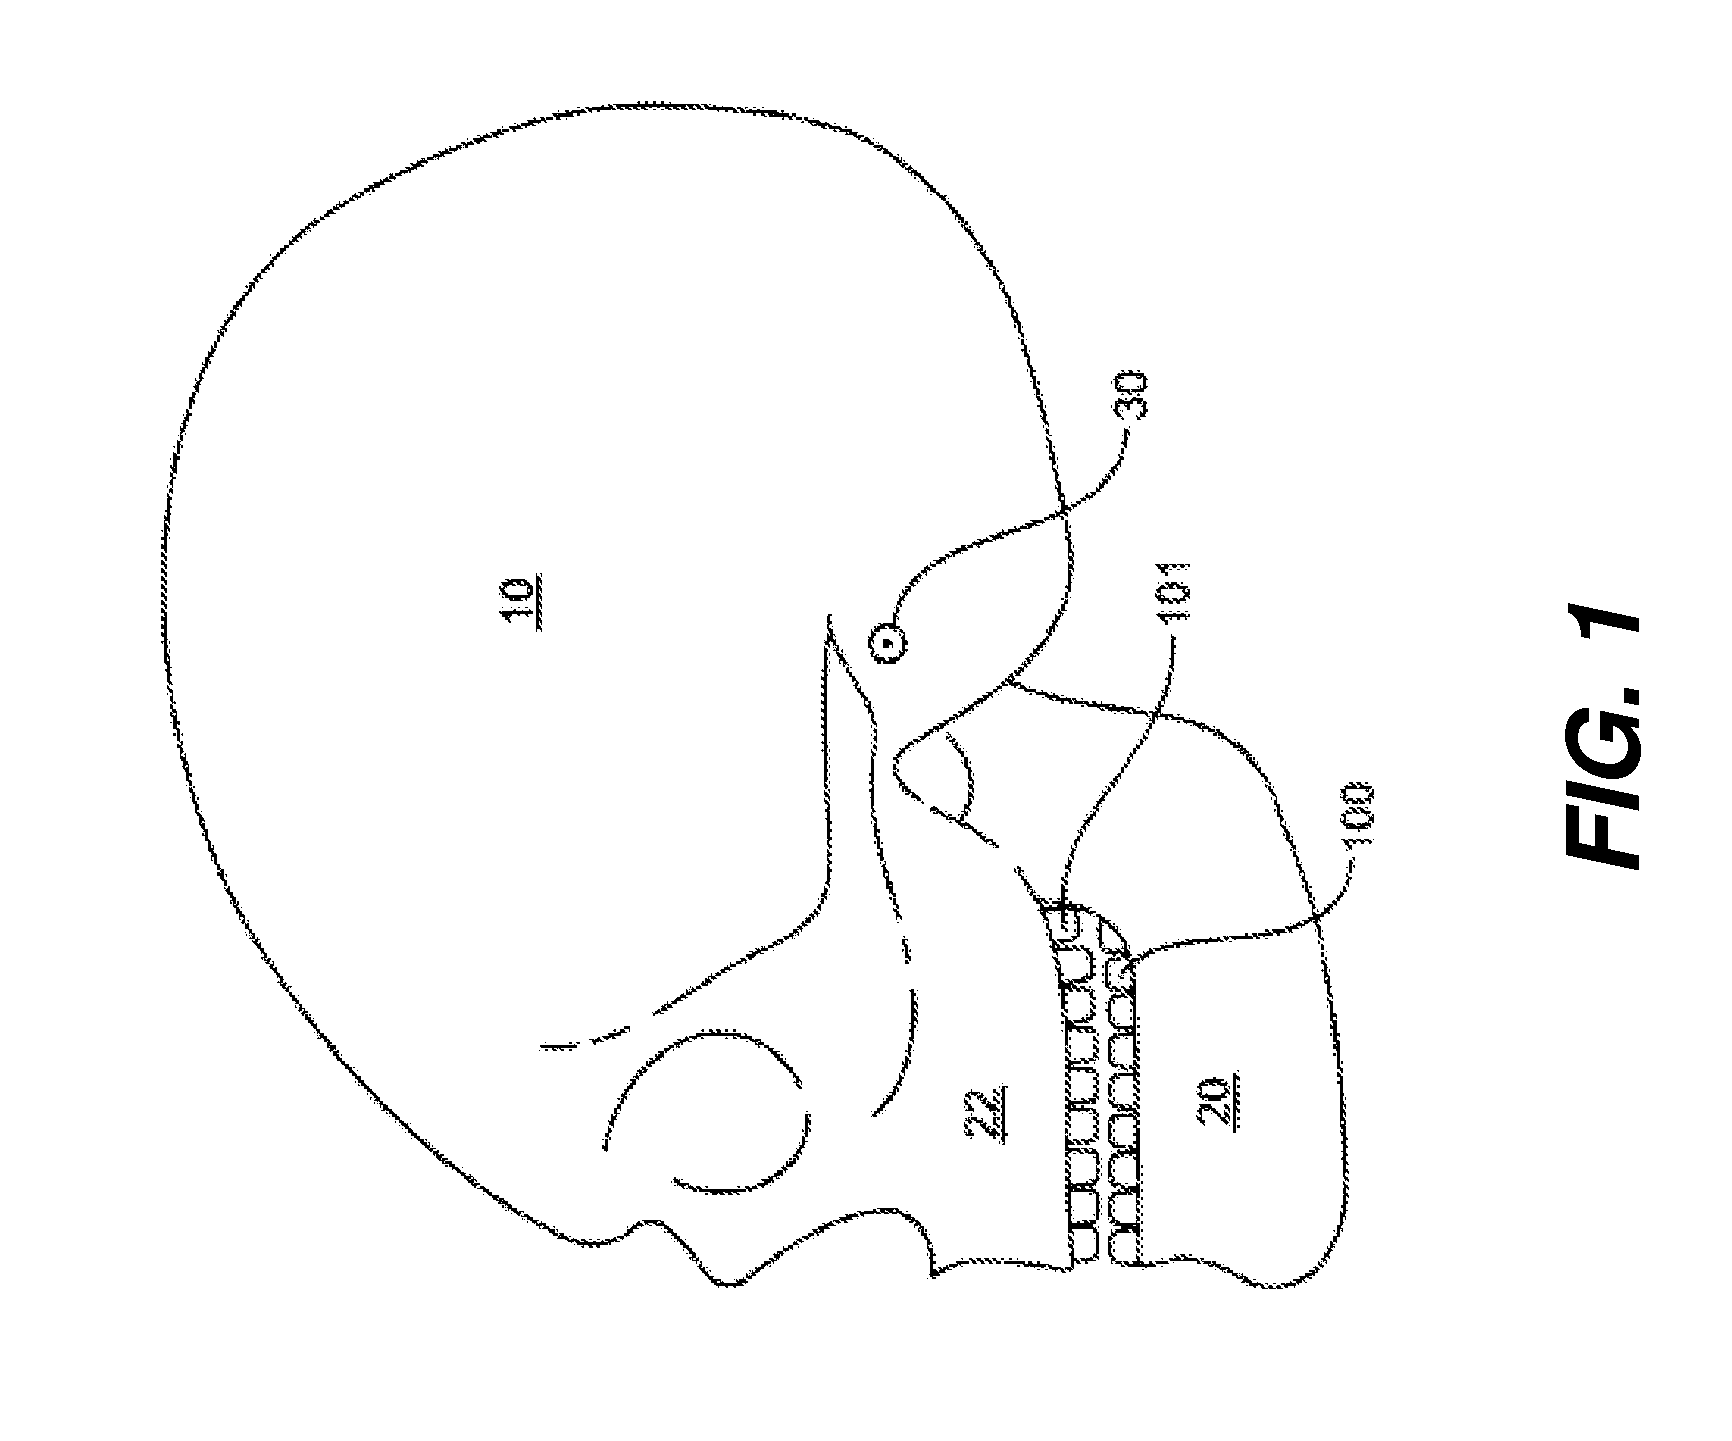 Method for producing teeth surface from x-ray scan of a negative impression